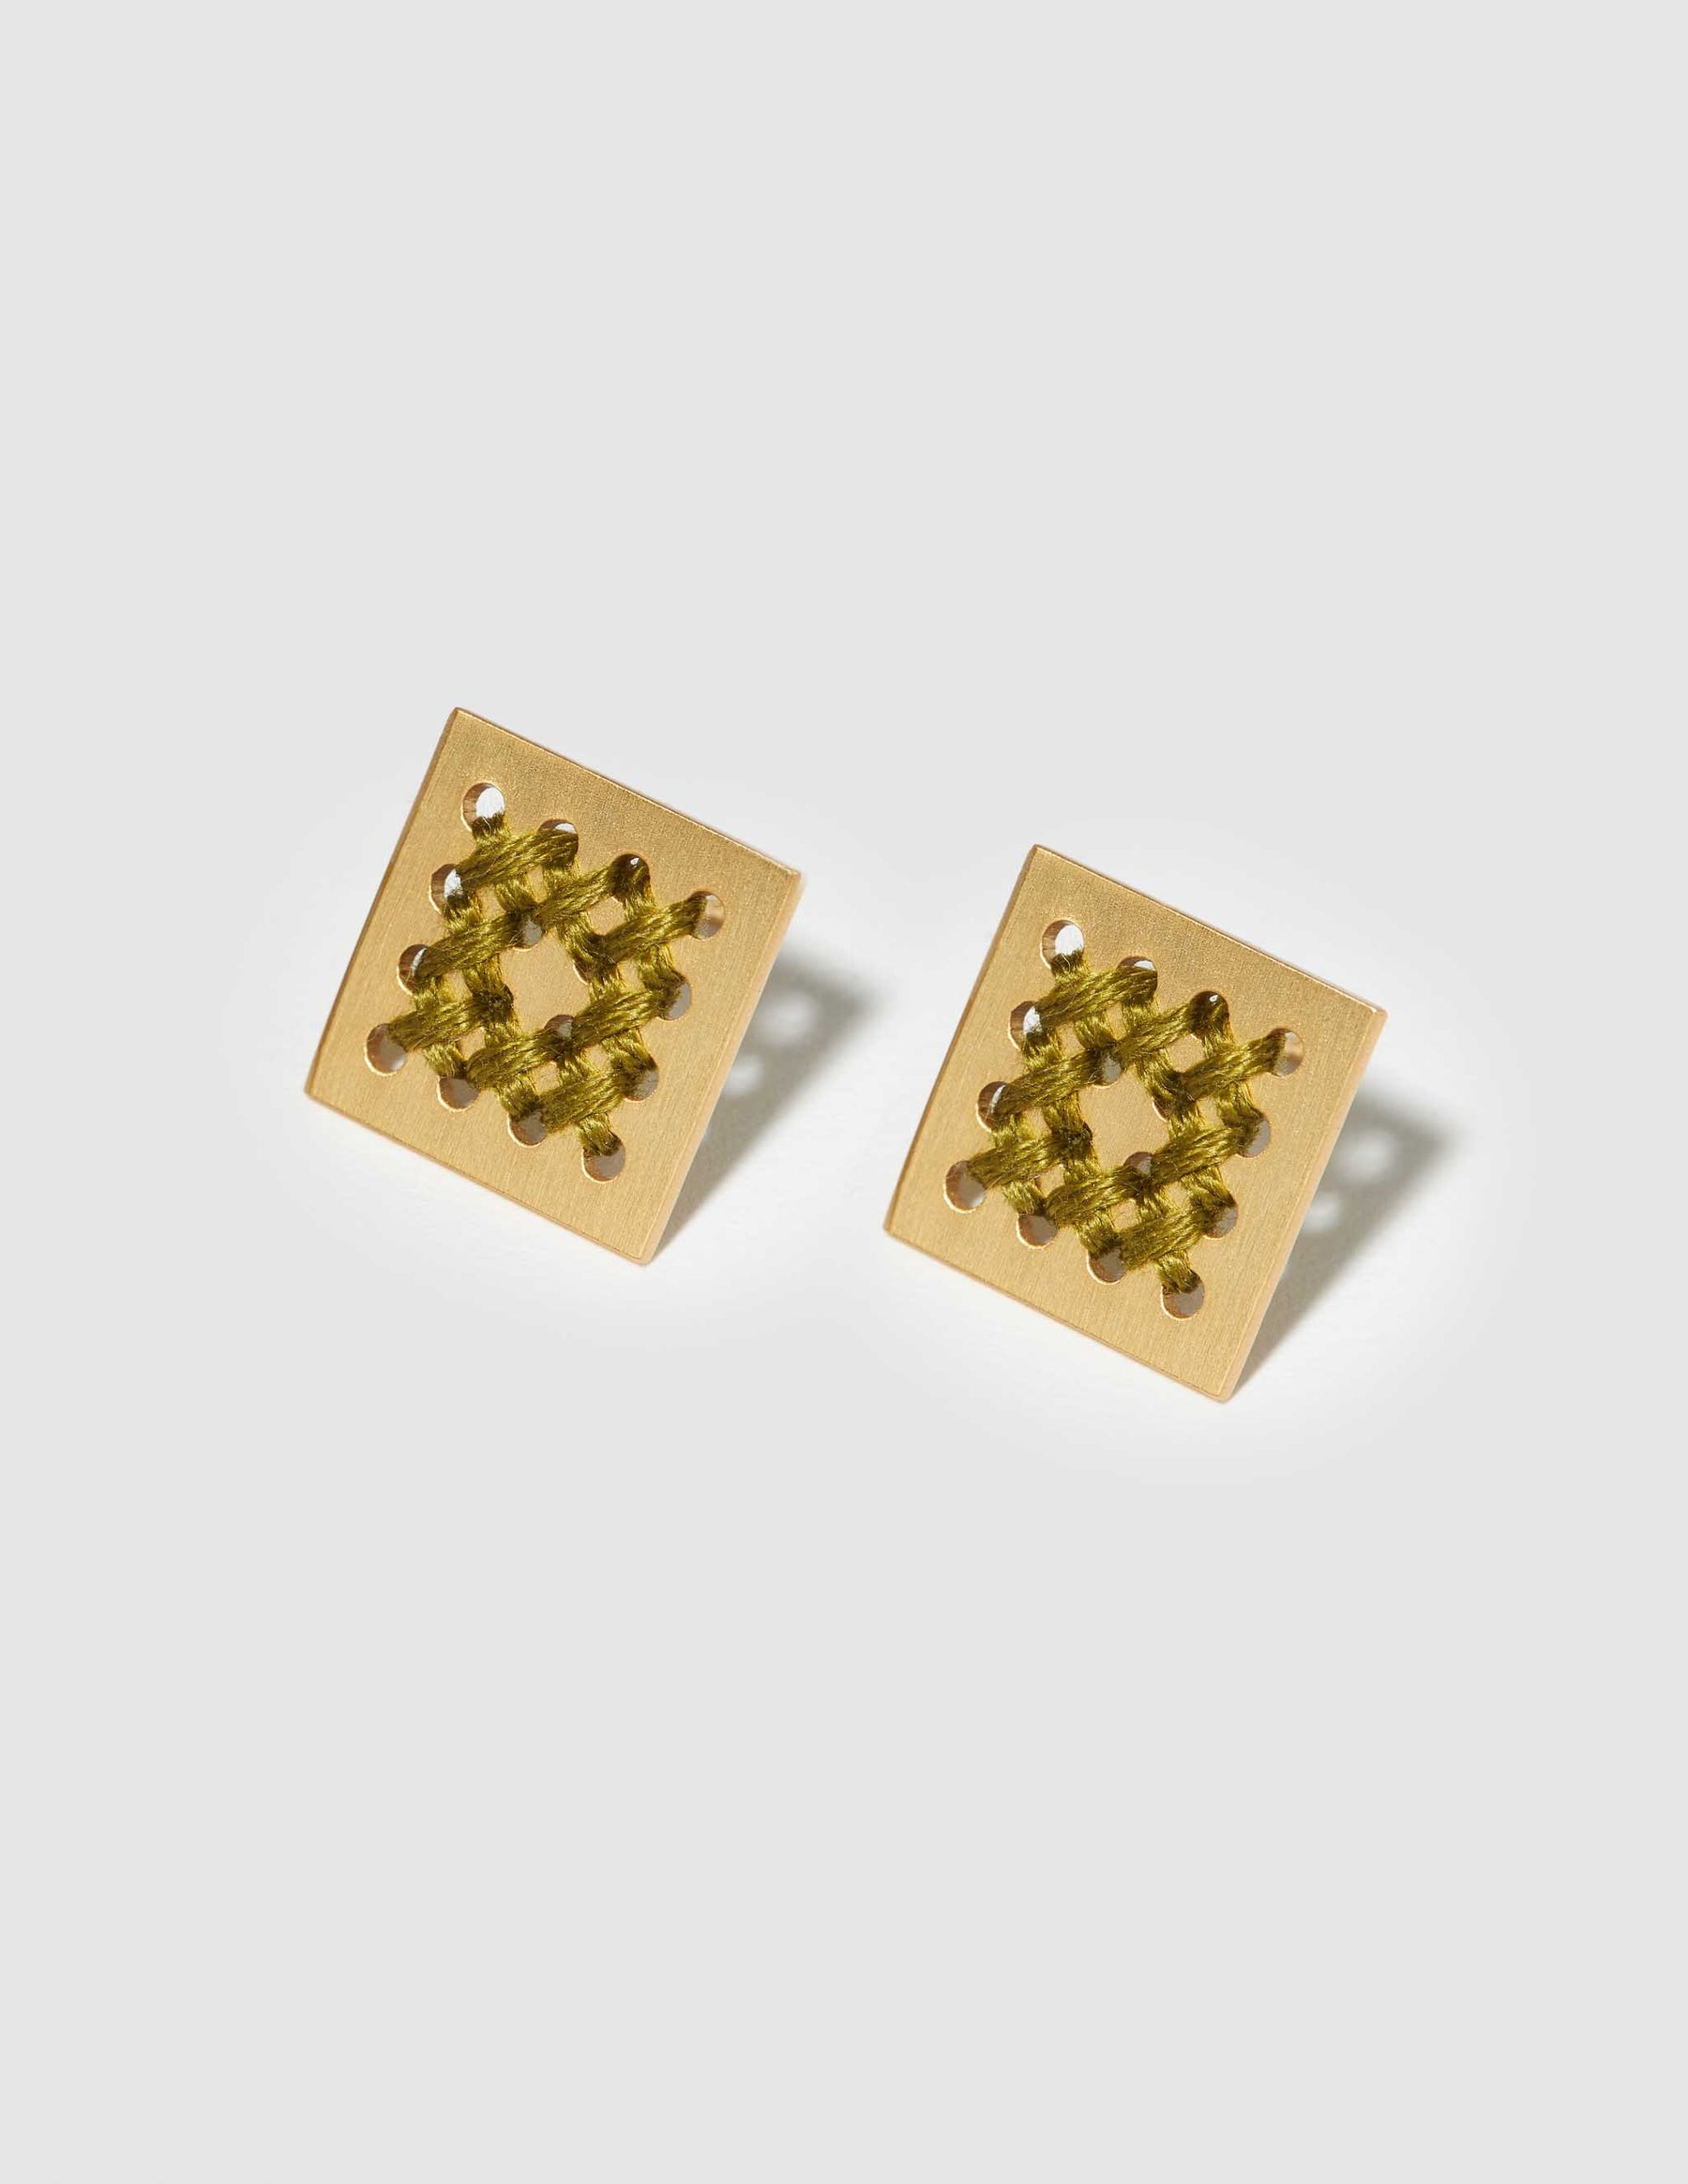 Fry Gold Stud Earrings - CHARALAMPIA